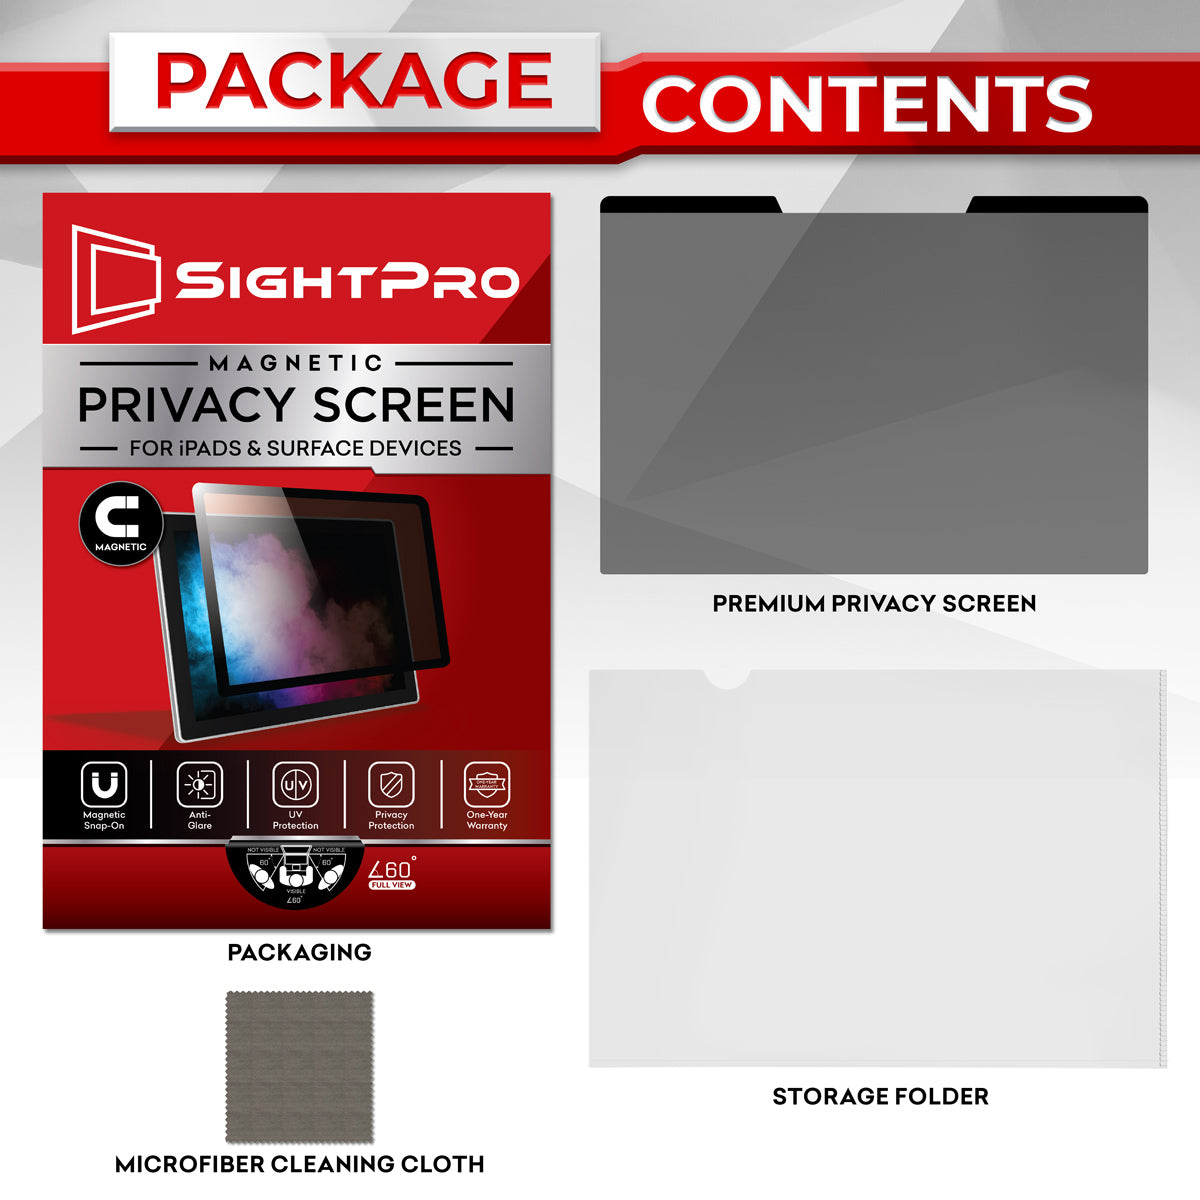 SightPro Magnetic Privacy Screen for Surface Laptop 13.5" (1, 2, 3)